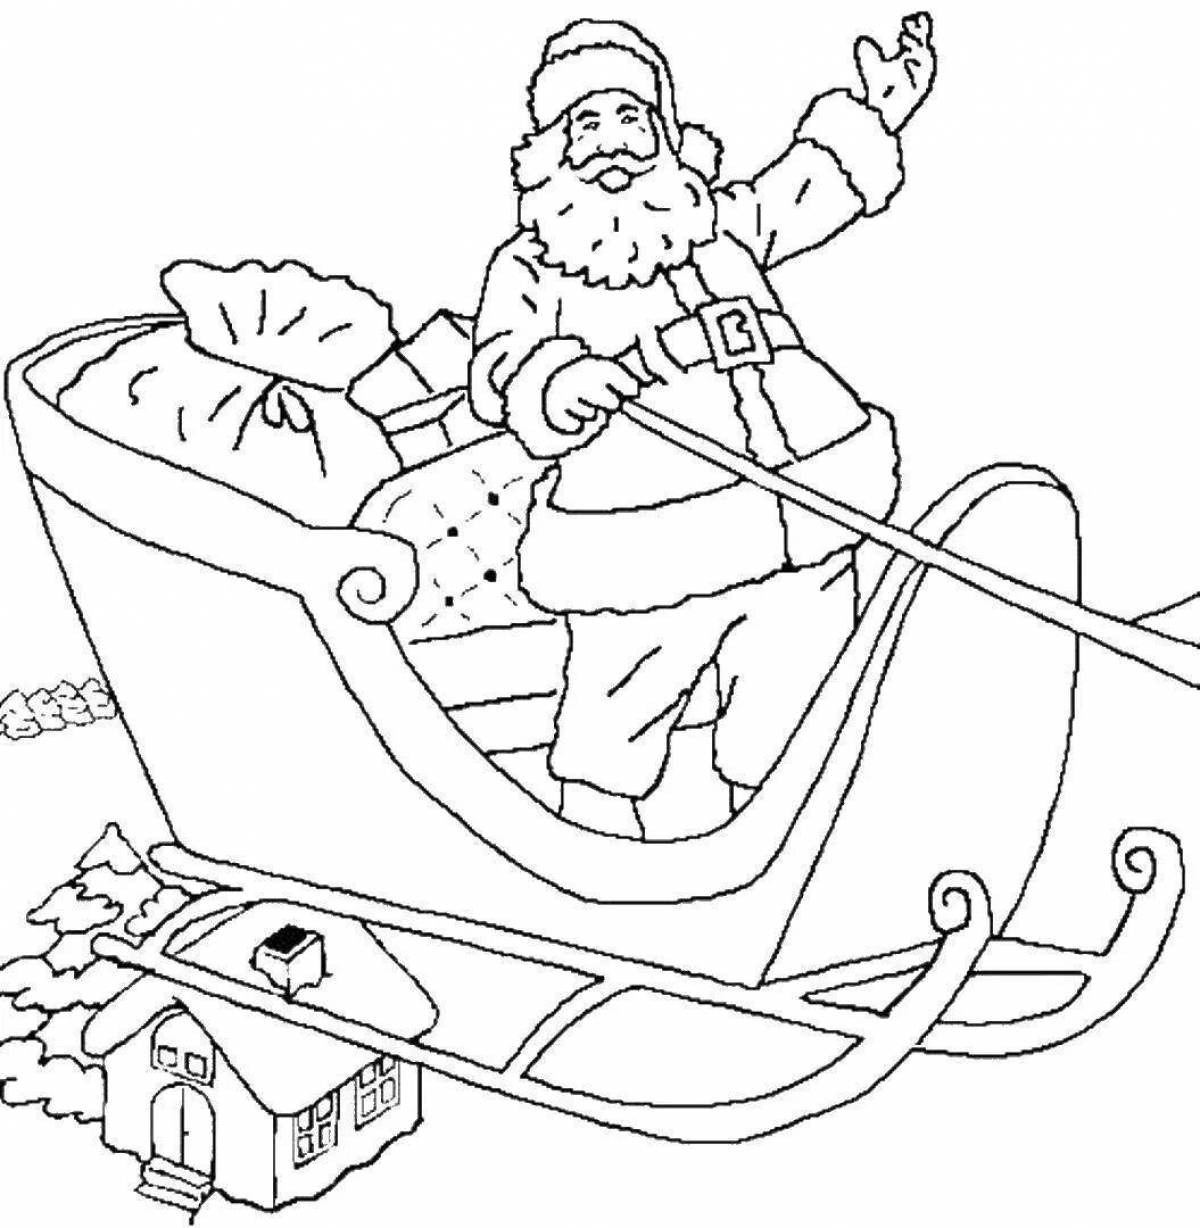 Coloring page festive Santa Claus on a sleigh